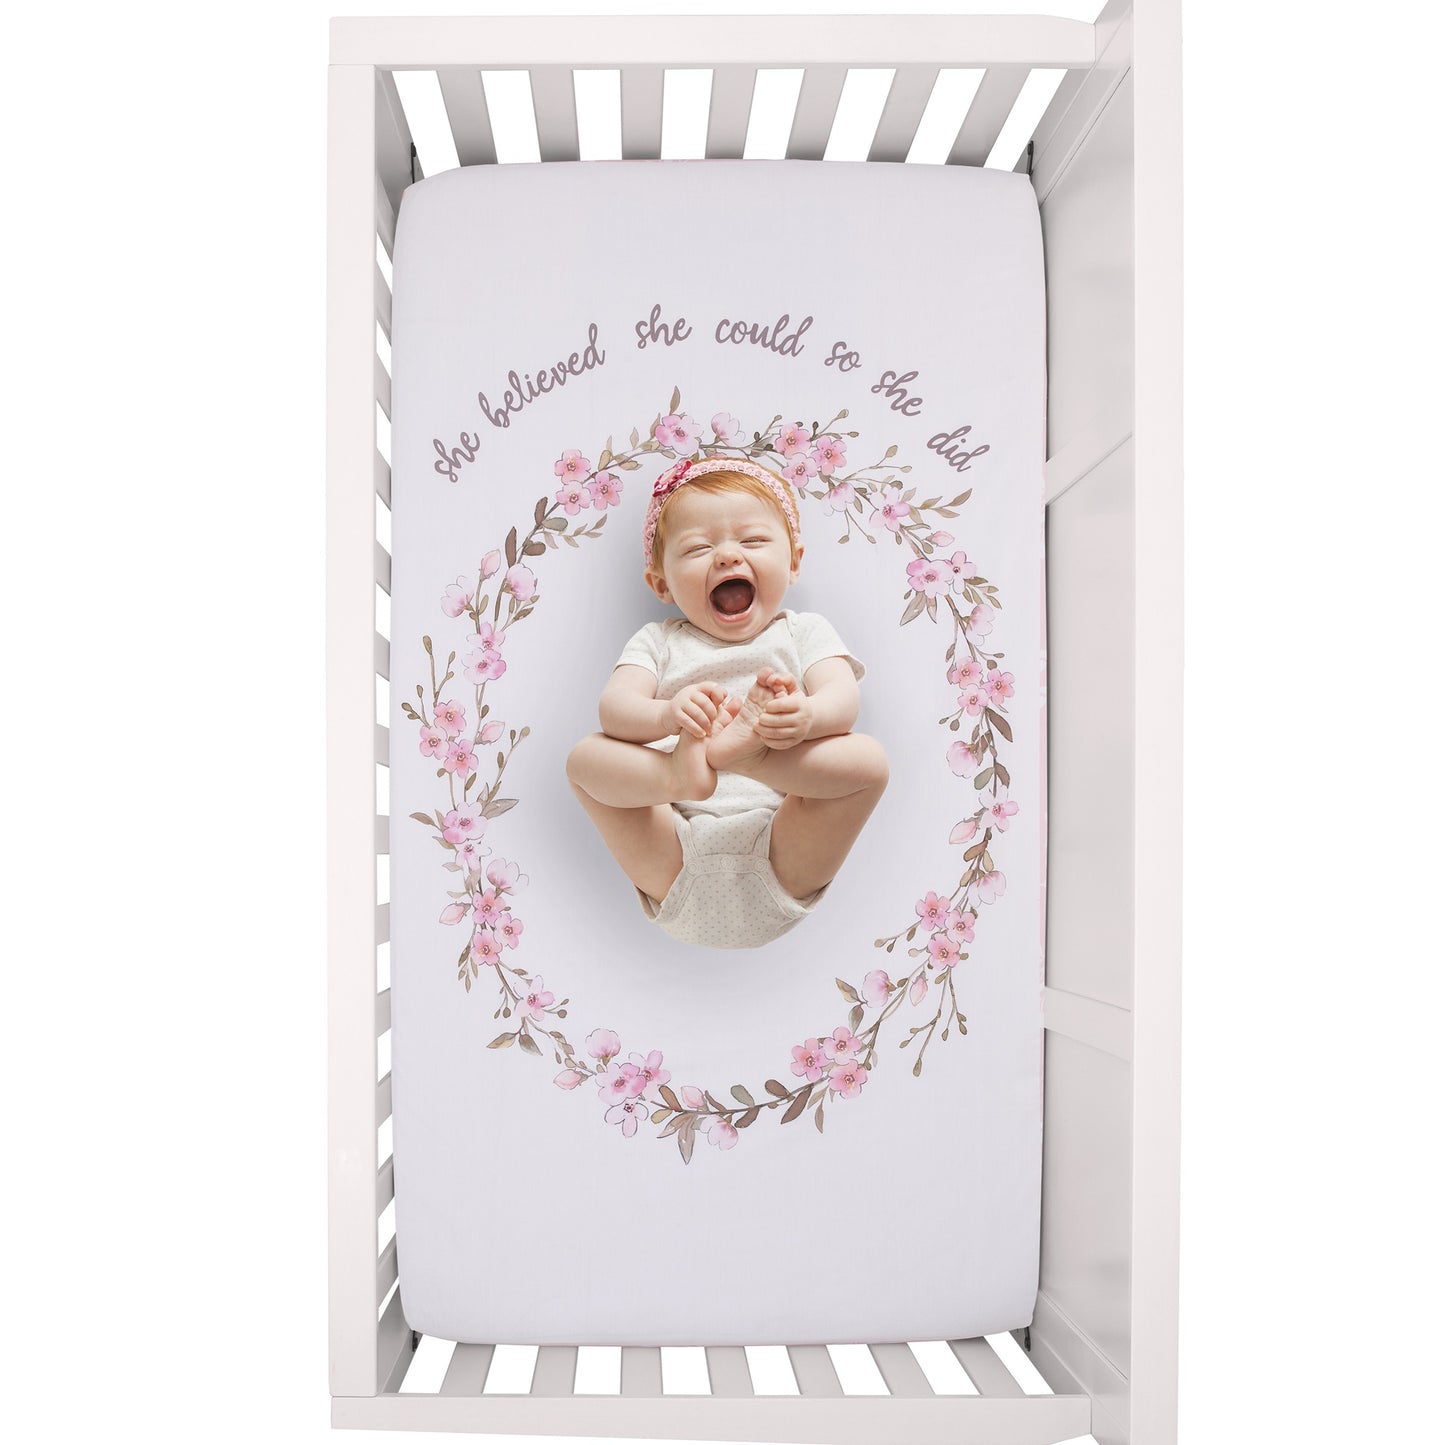 NoJo Flower Fairy Pink, White, and Taupe She Believed, She Could, So She Did 100% Cotton Nursery Photo Op Fitted Crib Sheet